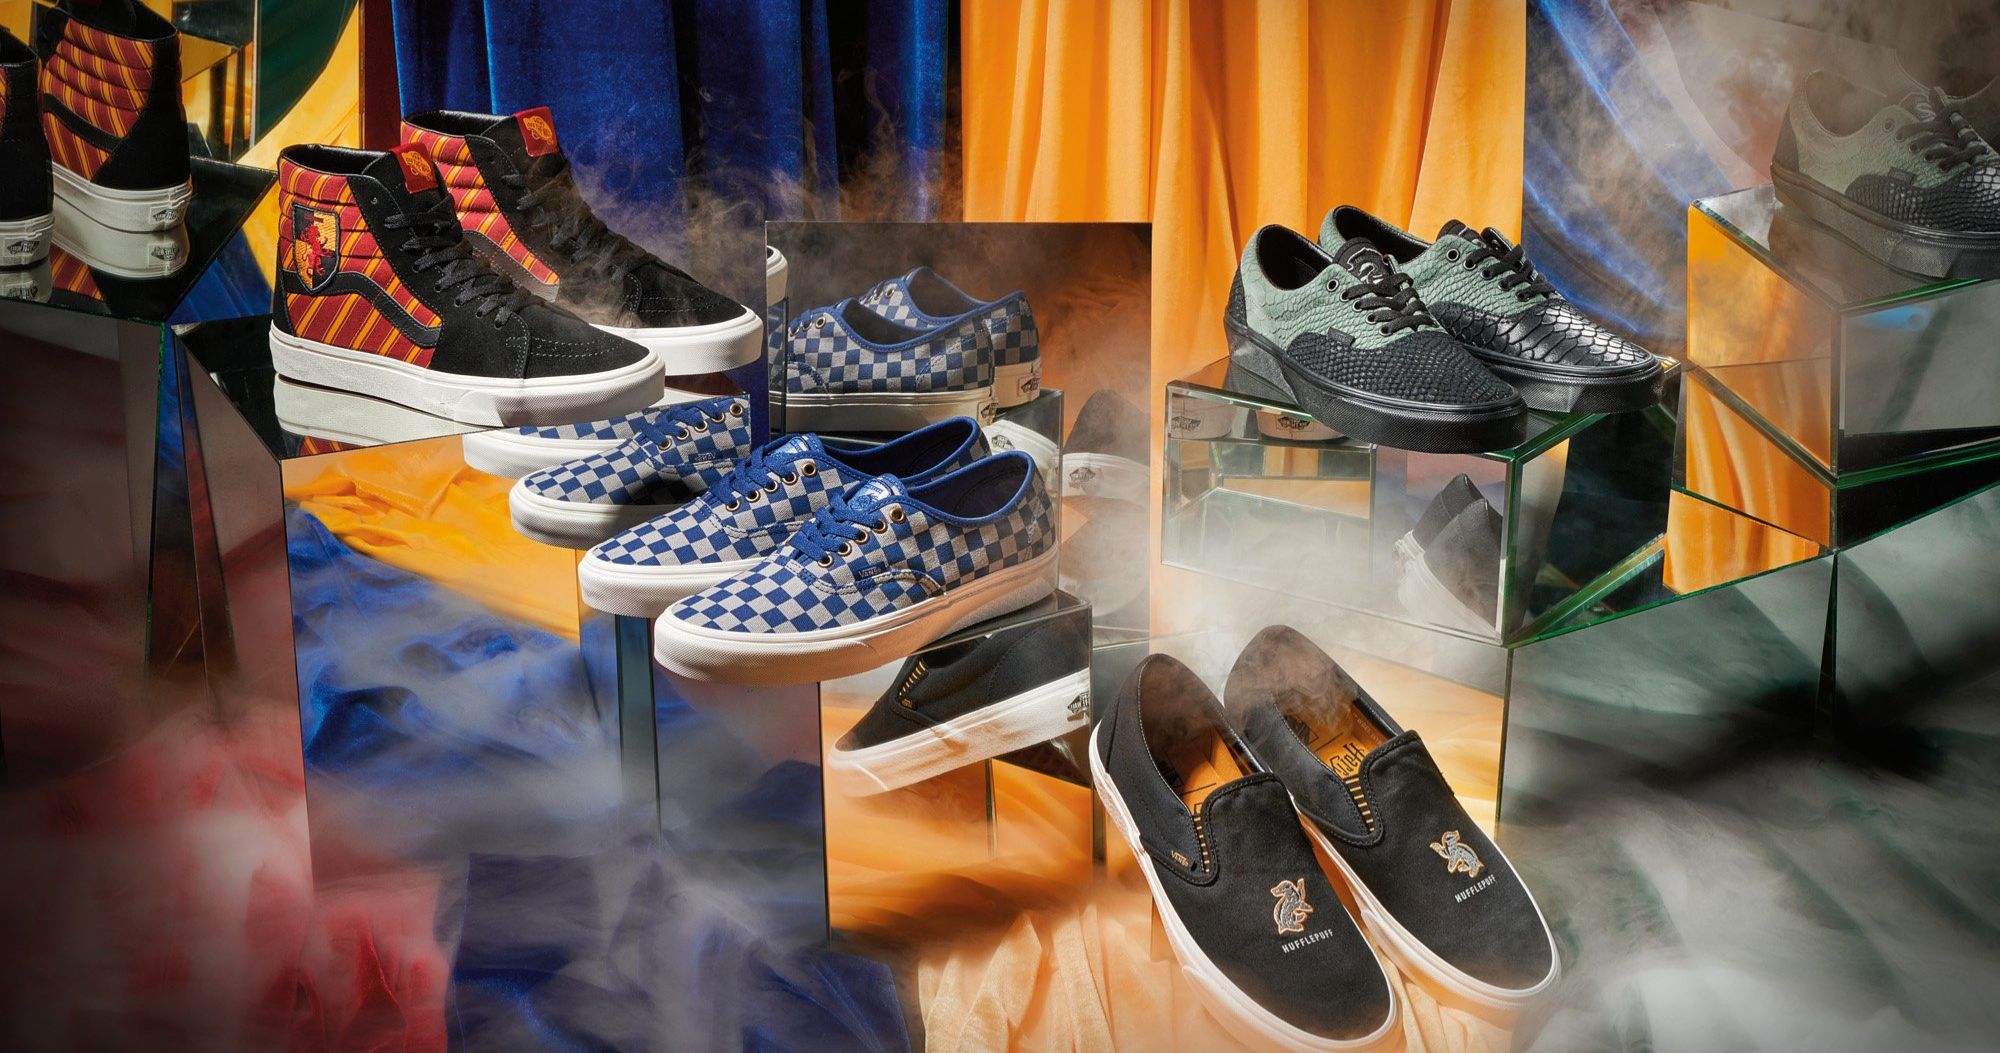 Vans Unveils Their Magical Harry Potter Shoes Collection for 2019